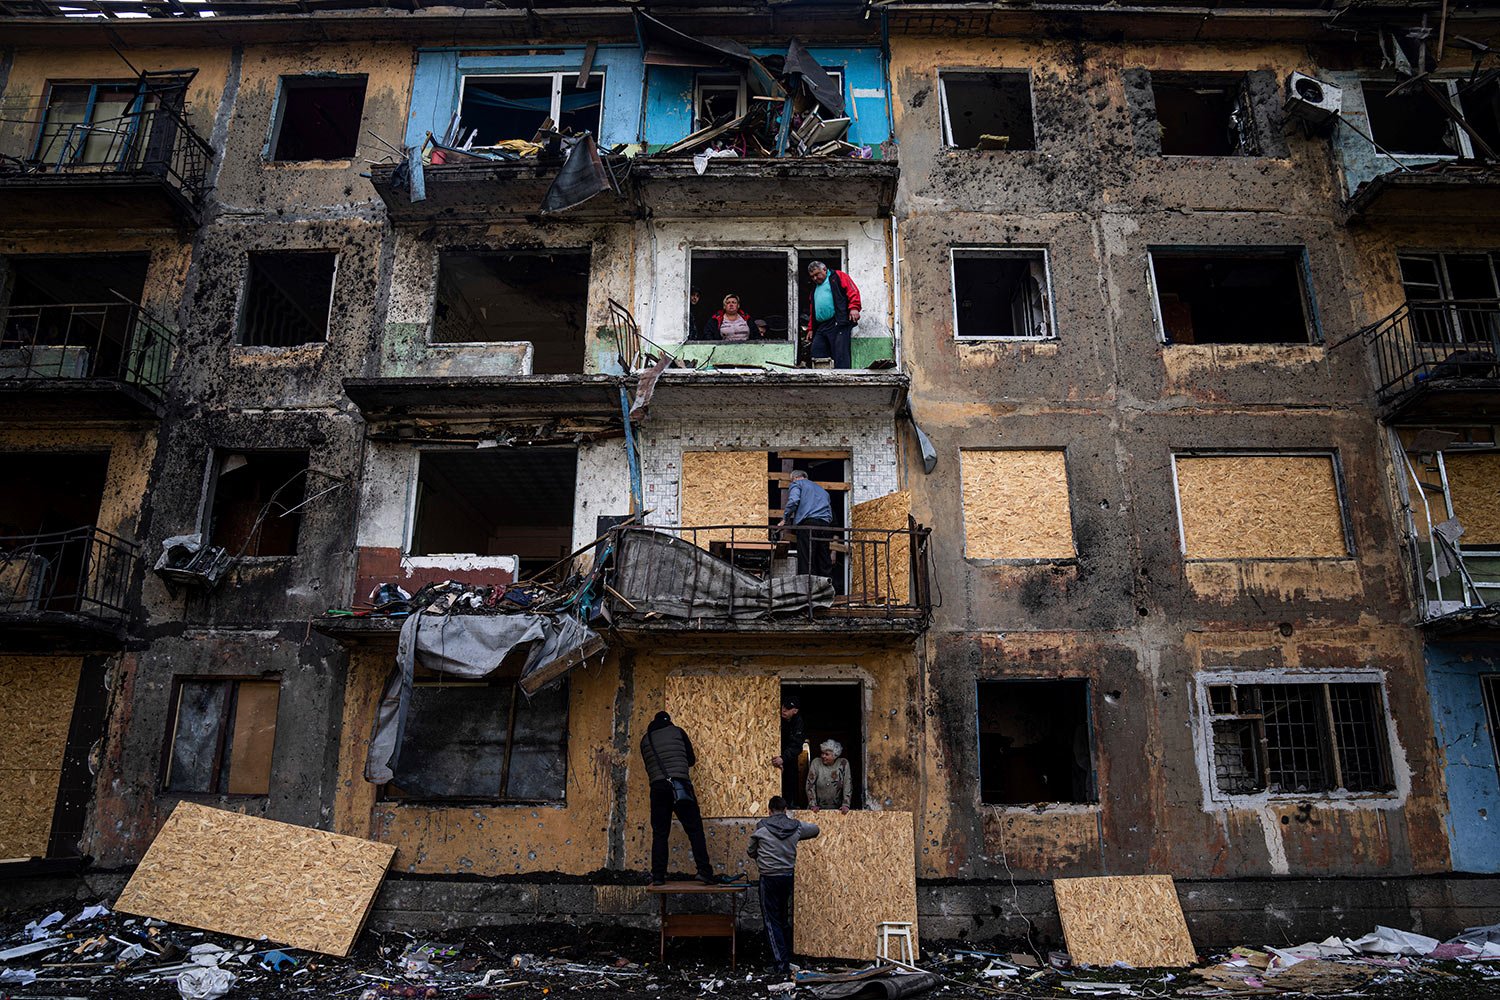  Local residents close the windows of an apartment building with plywood after Russian shelling in Dobropillya, Donetsk region, eastern Ukraine, Saturday, April 30, 2022. (AP Photo/Evgeniy Maloletka) 